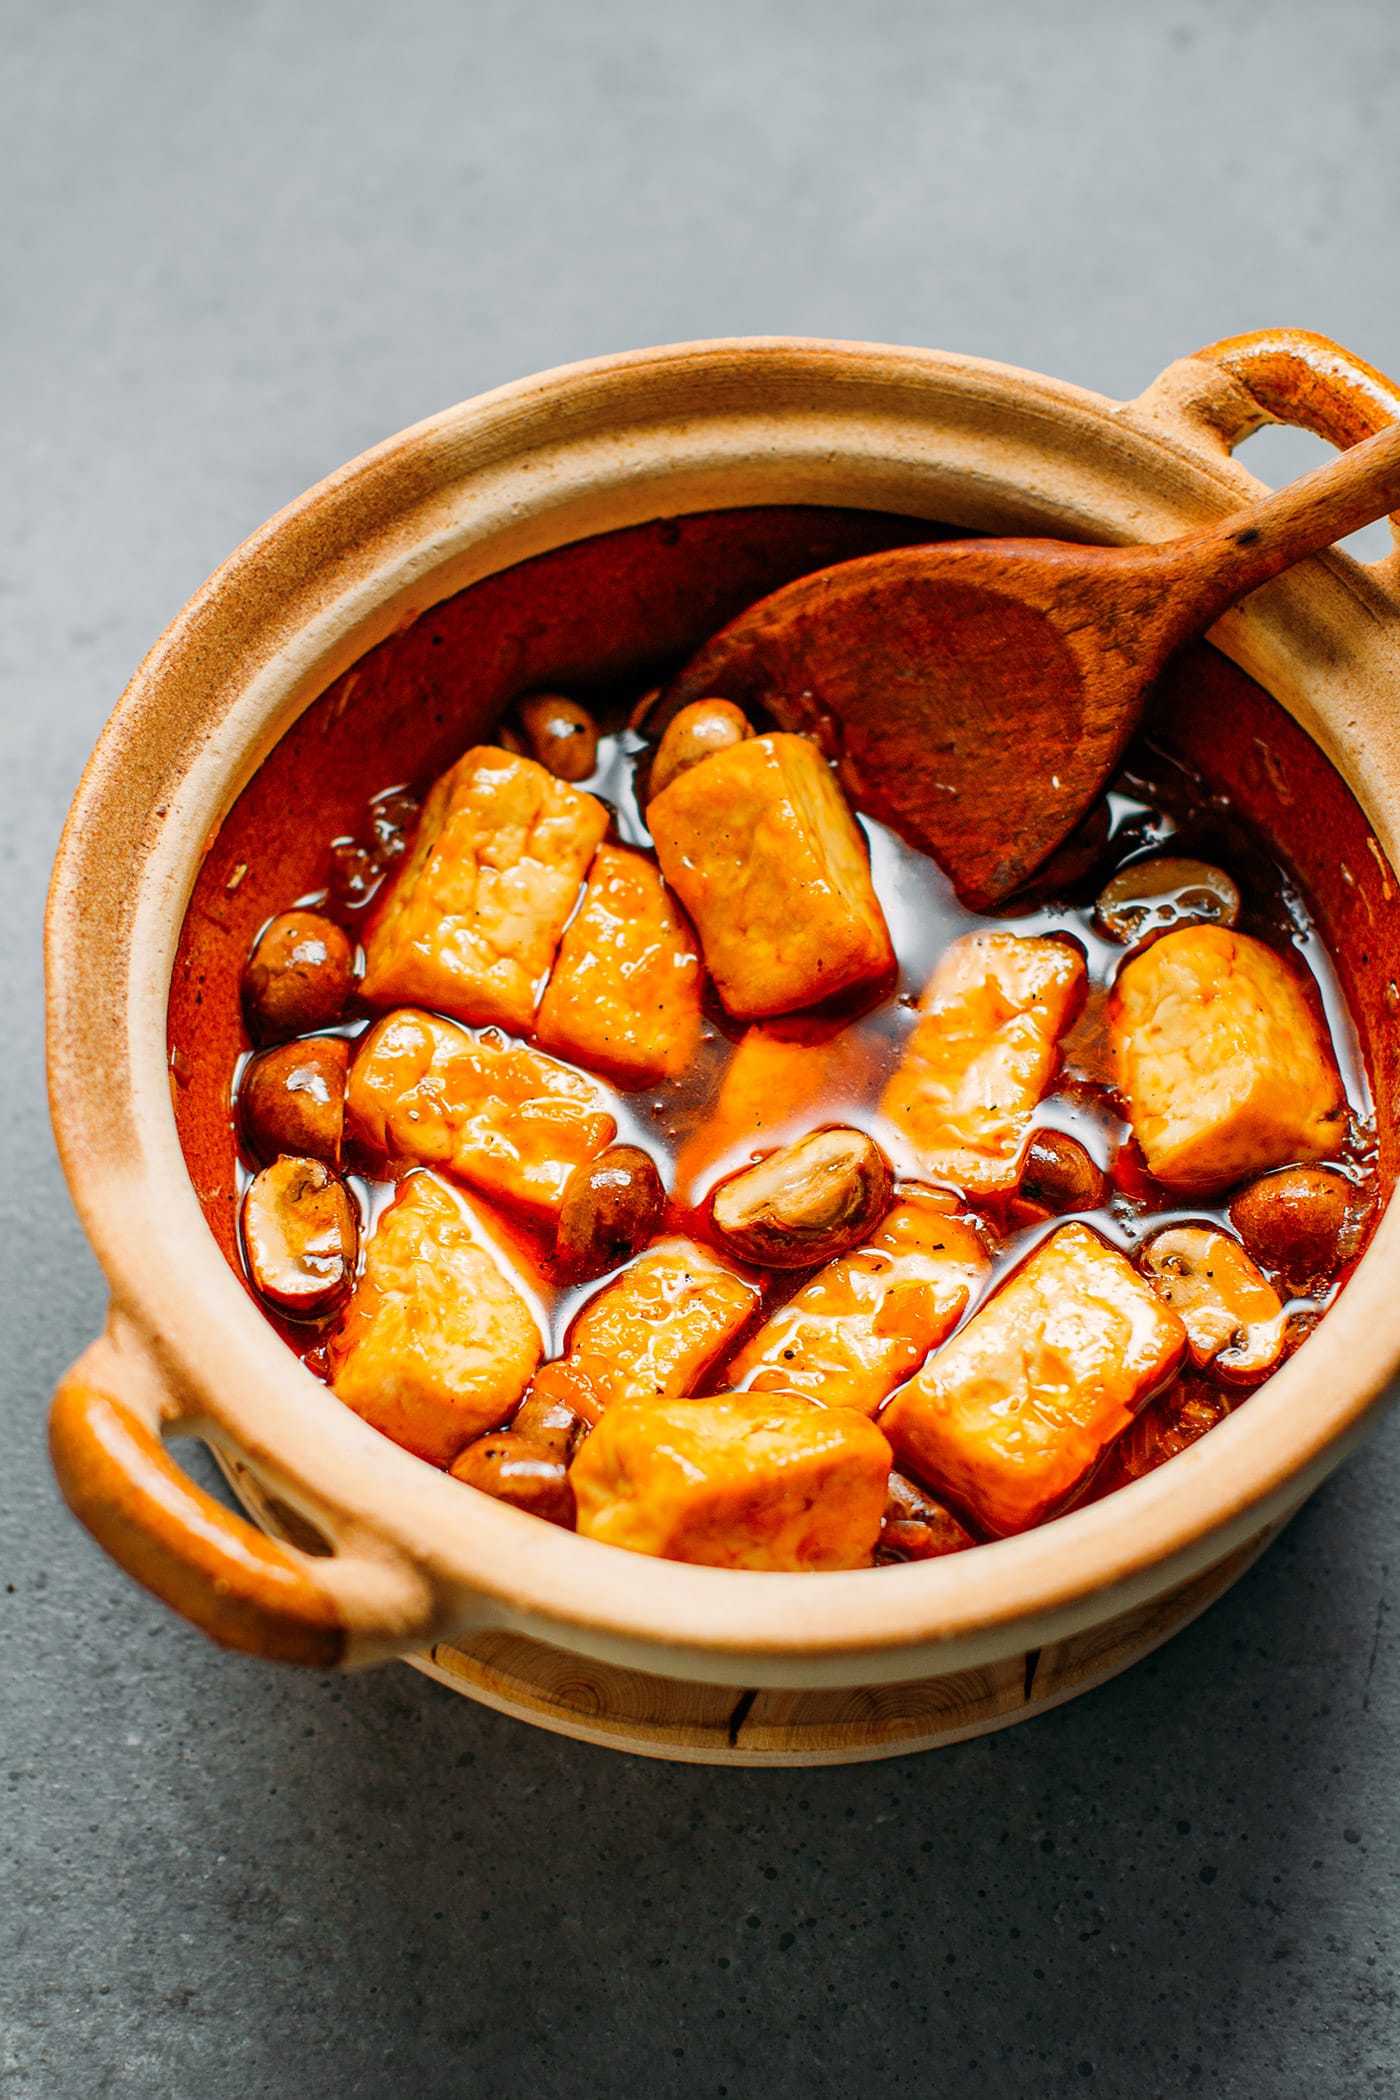 Fried tofu and mushrooms in a clay pot